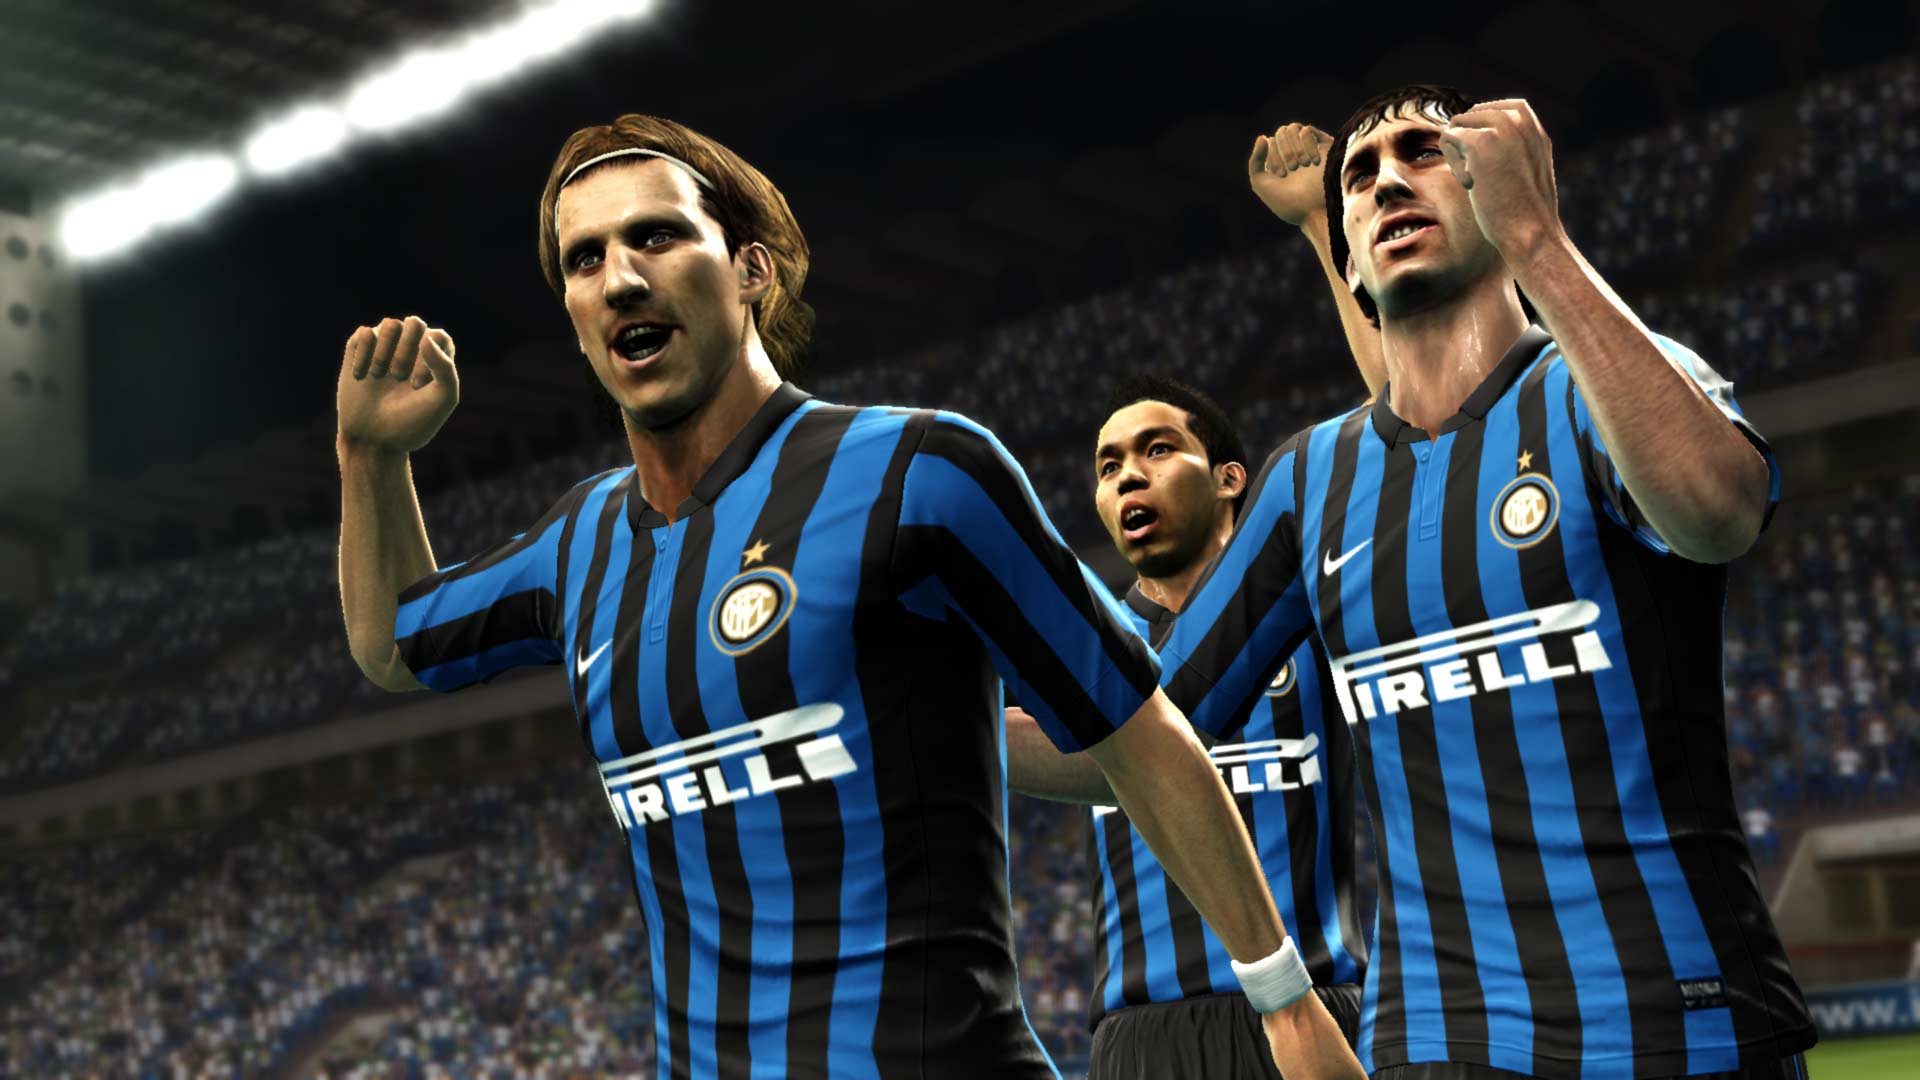 PES 2012 PS3 In 2022 